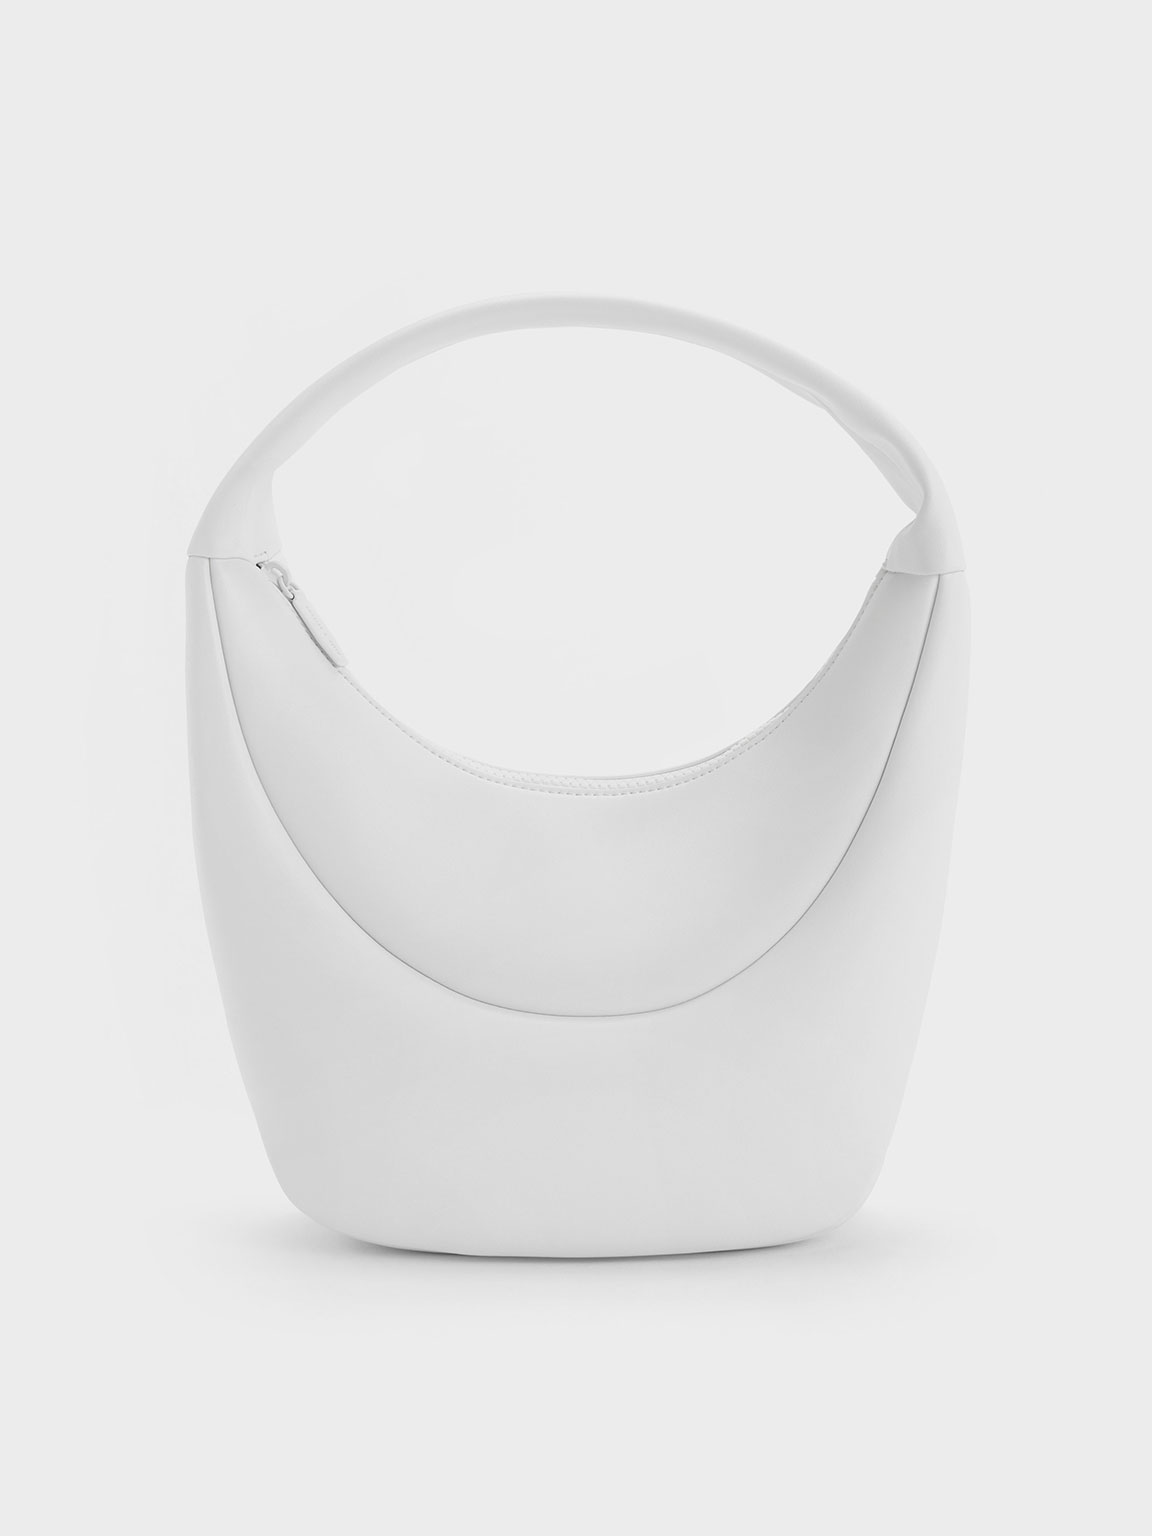 Charles & Keith Elongated Curved Hobo Bag In White